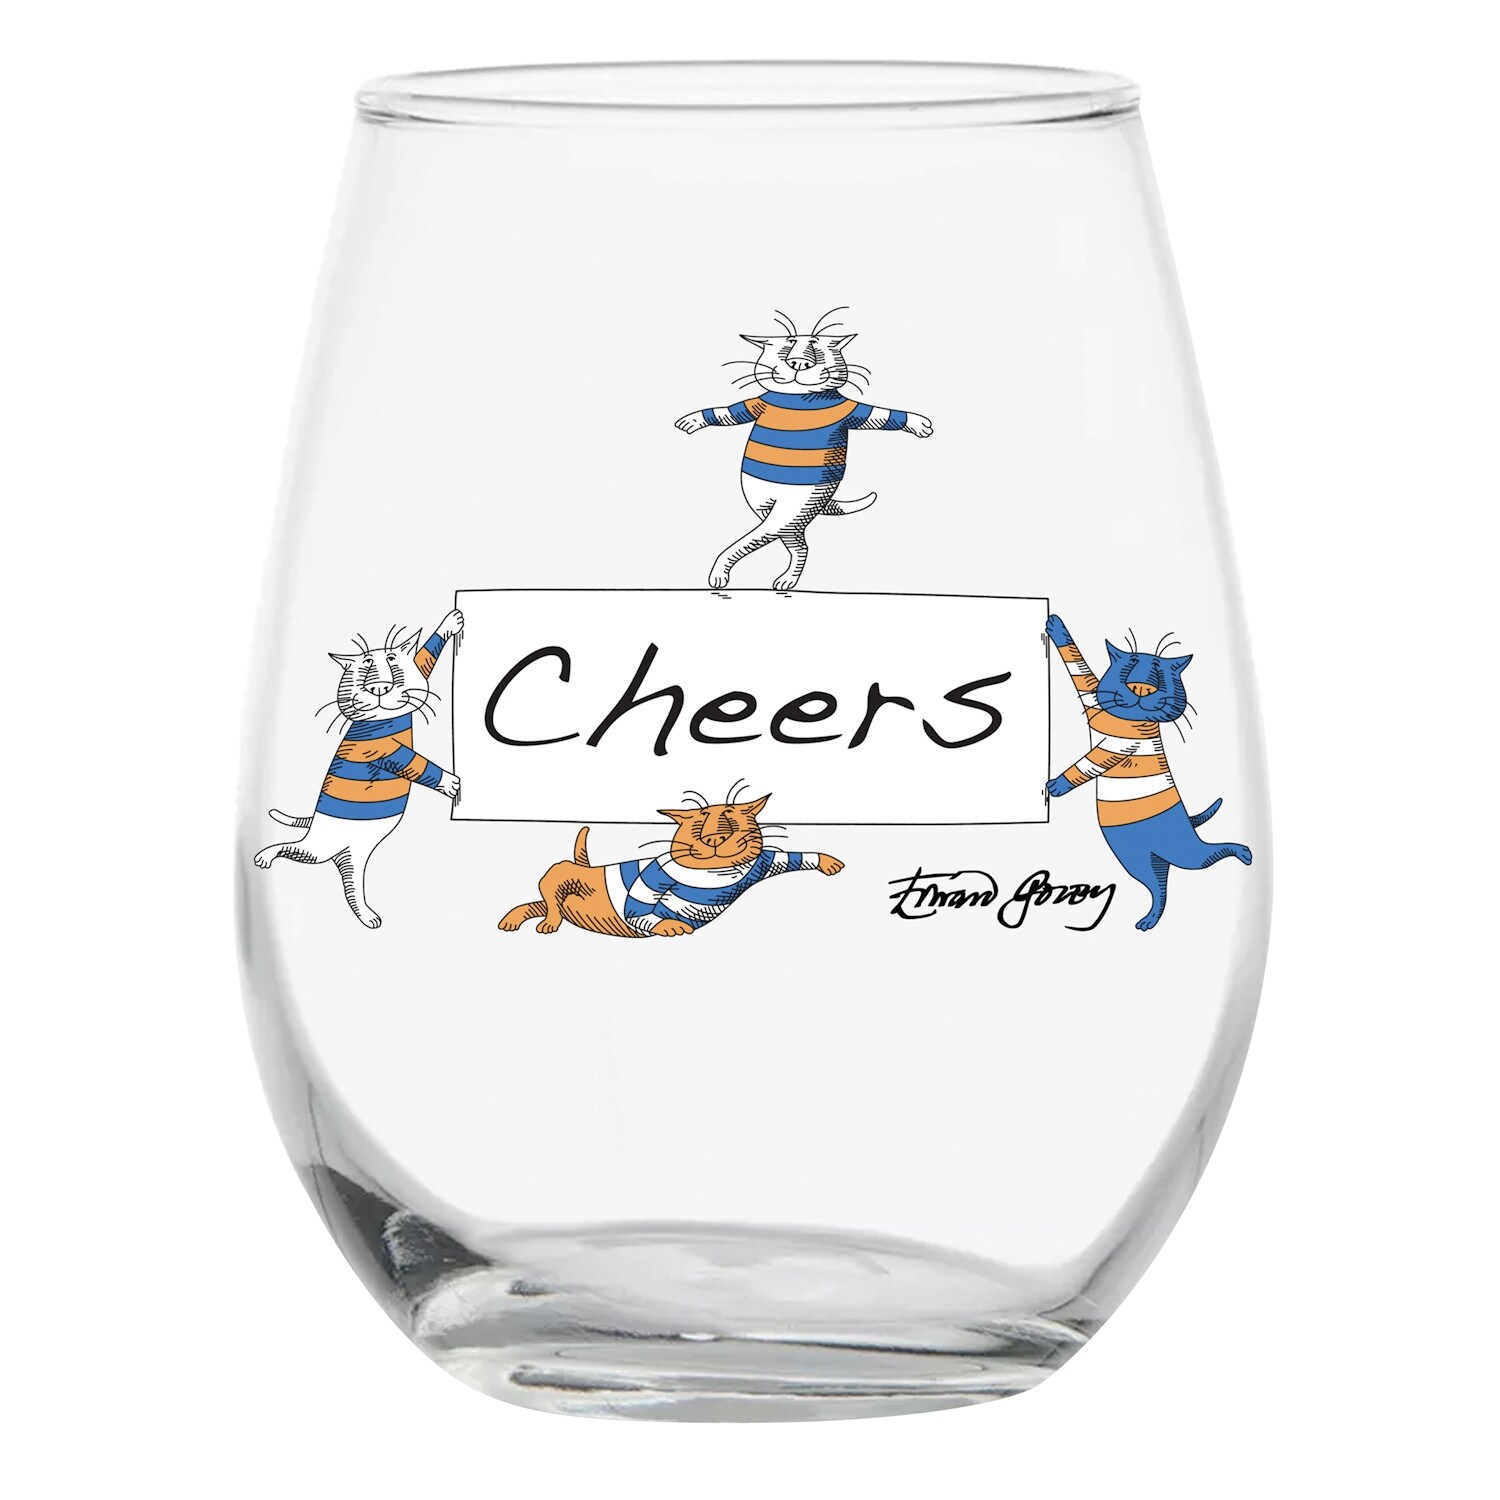 https://ak1.ostkcdn.com/images/products/is/images/direct/096c4d2ec90dc8d4ec21ac633b449f8342e5f919/Image-Exchange-Edward-Gorey-Cats-Stemless-Wine-Glasses---Set-of-4-Illustrated-Glass-Cups-Say-Cheers%2C-Salud%2C-Prost%2C-Sante.jpg